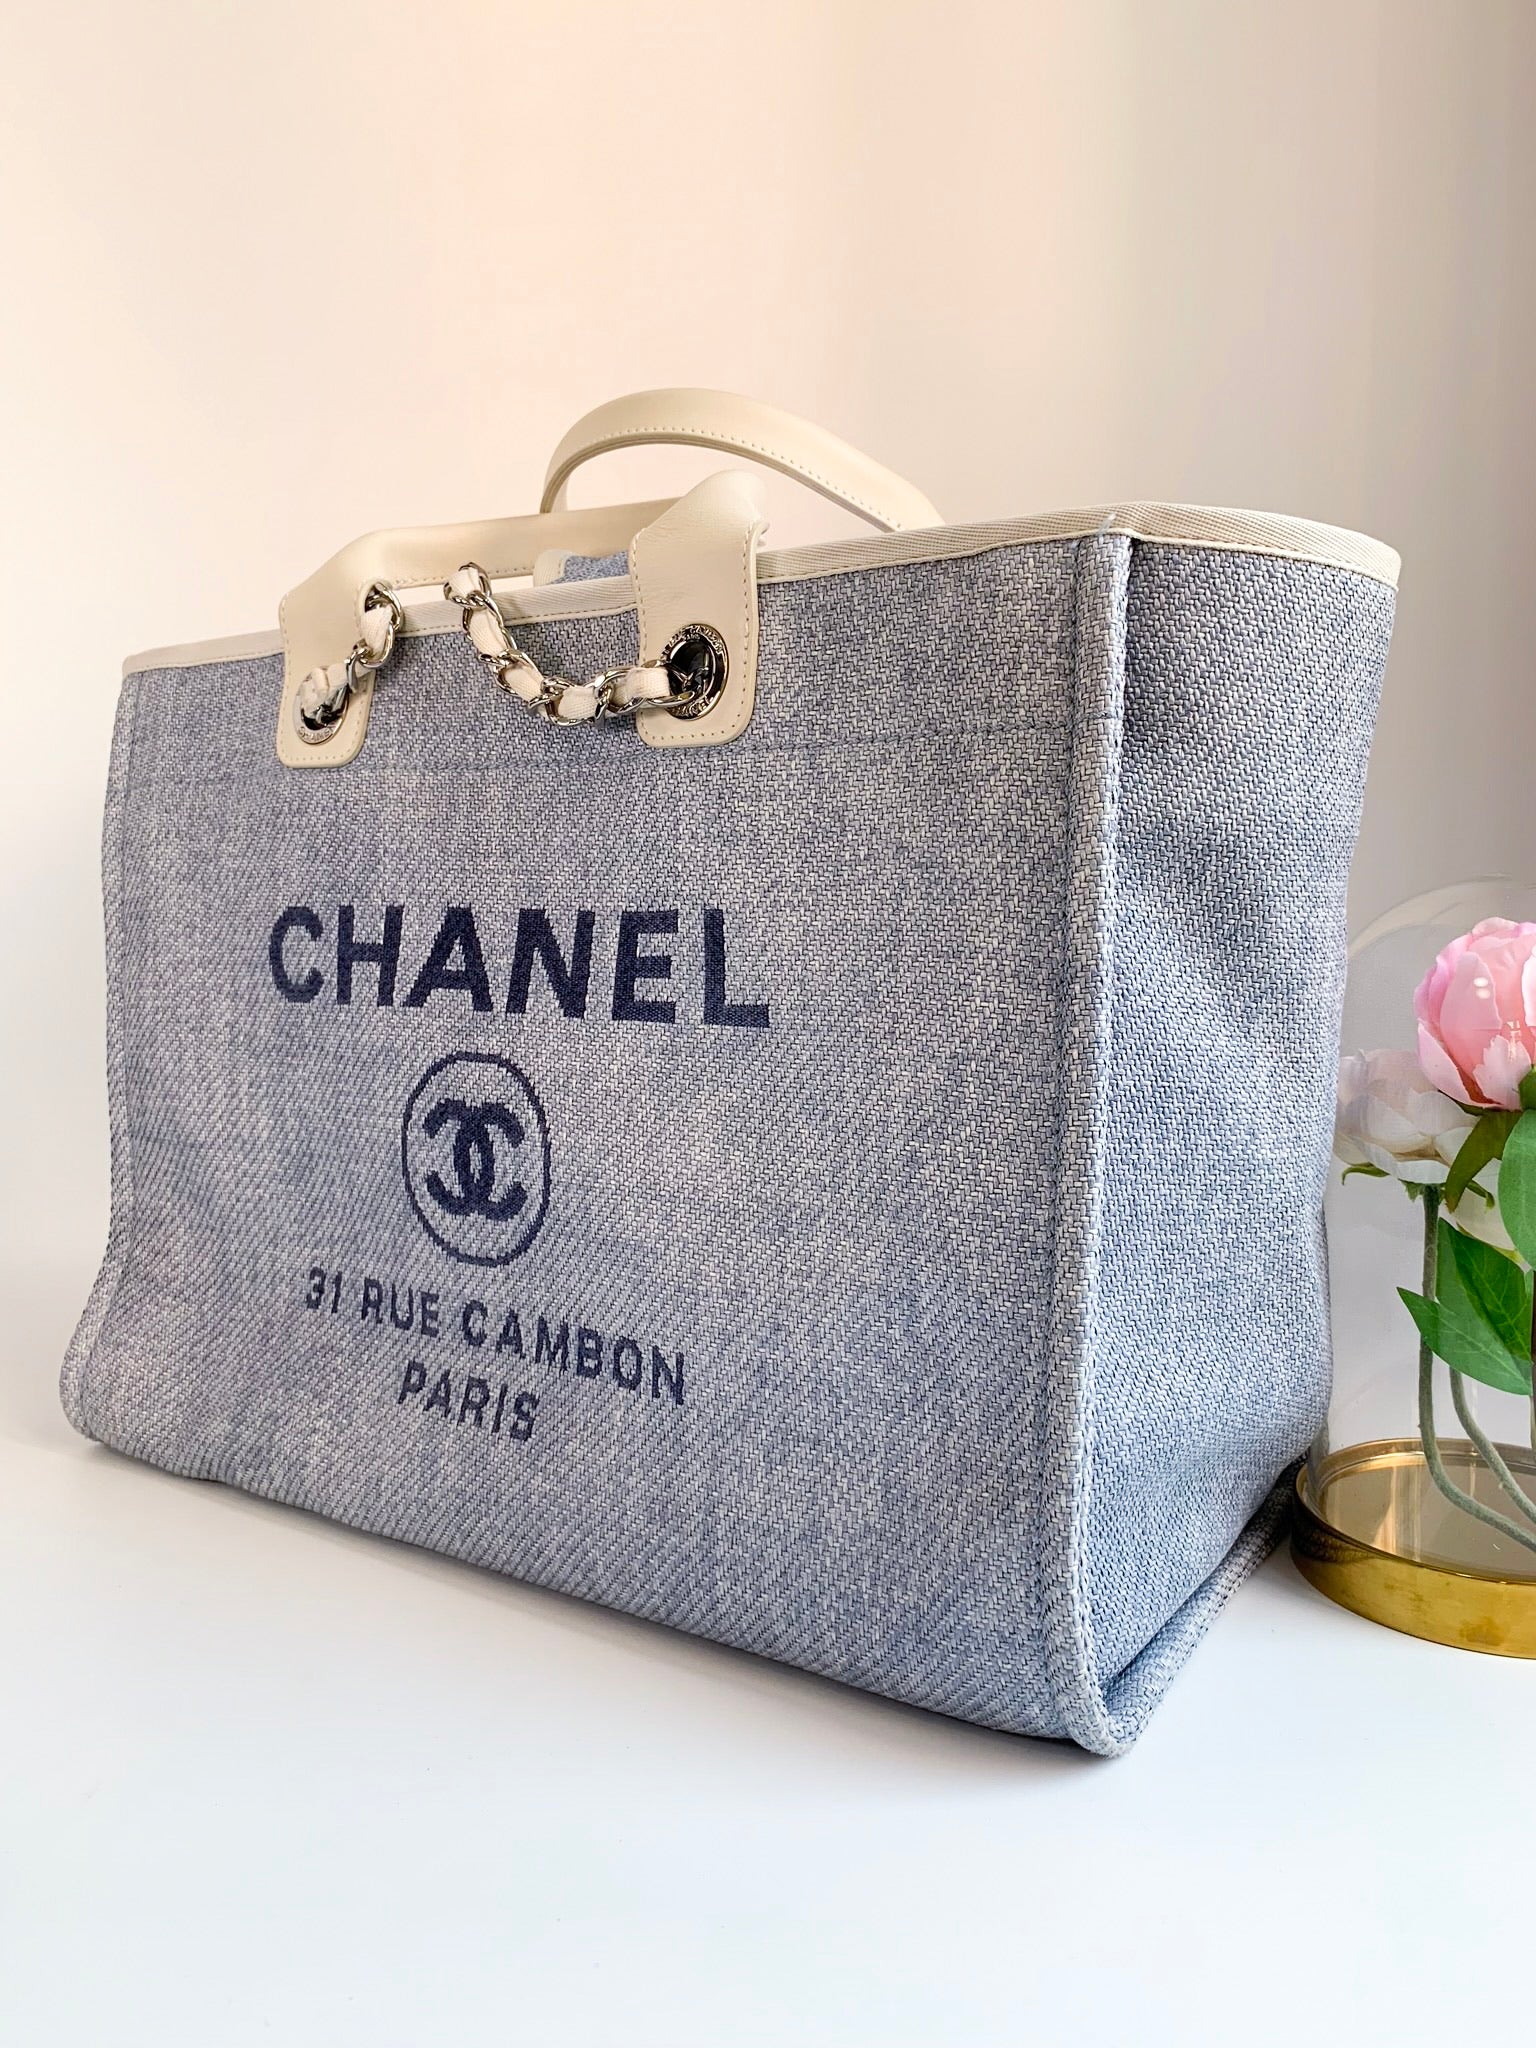 Chanel Deauville Canvas Drawstring Backpack